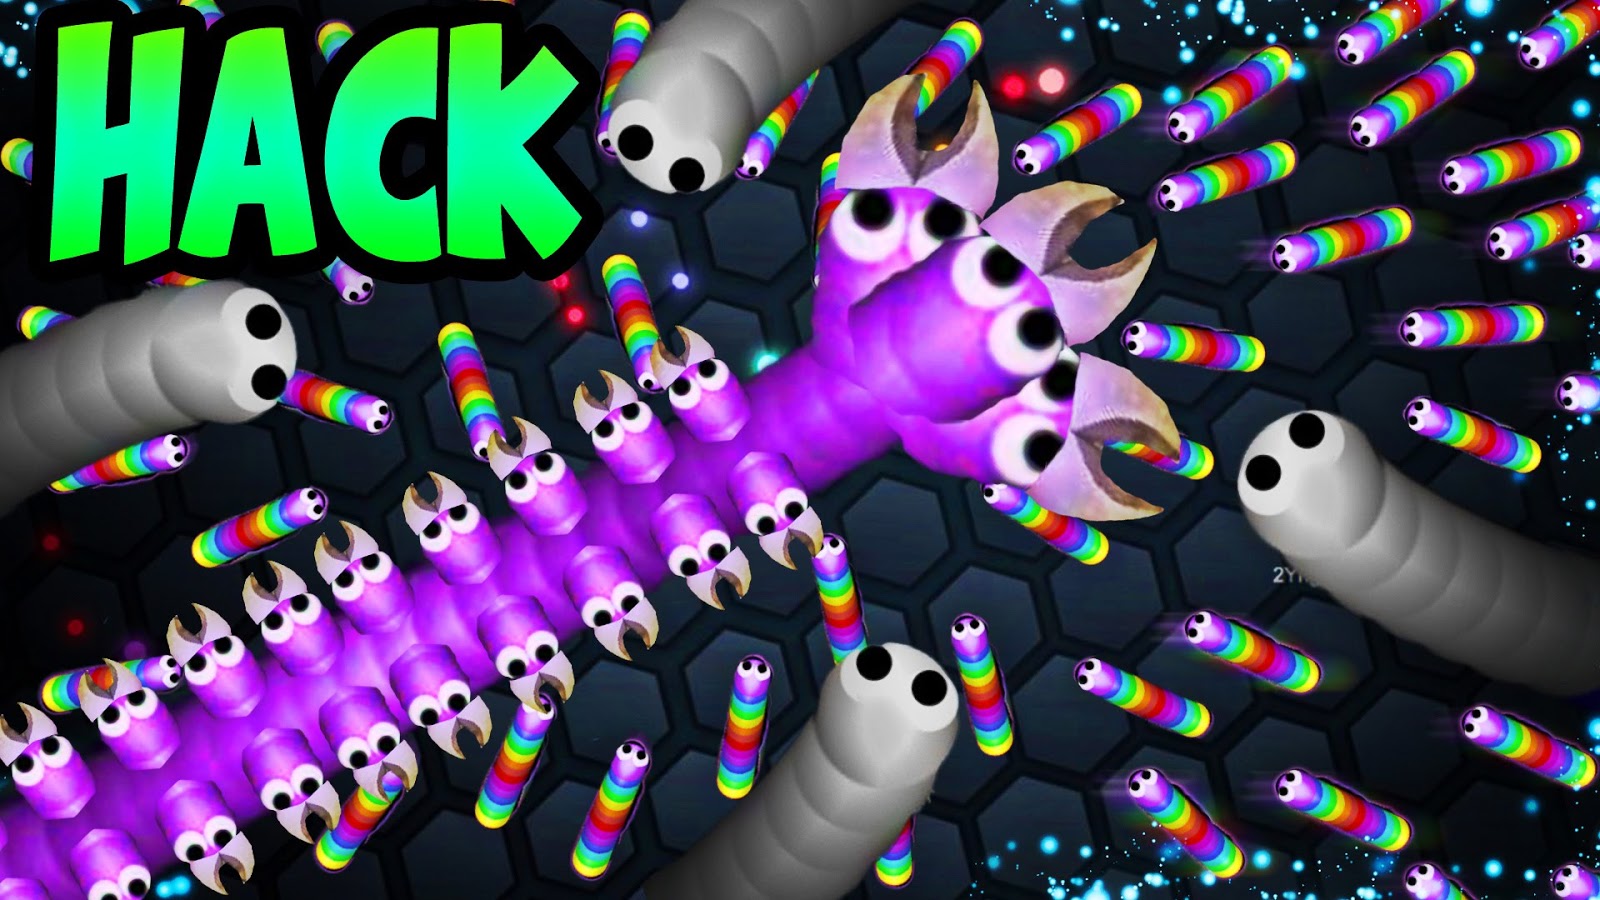 Slither.io Skins, Mods, Hack & Guide